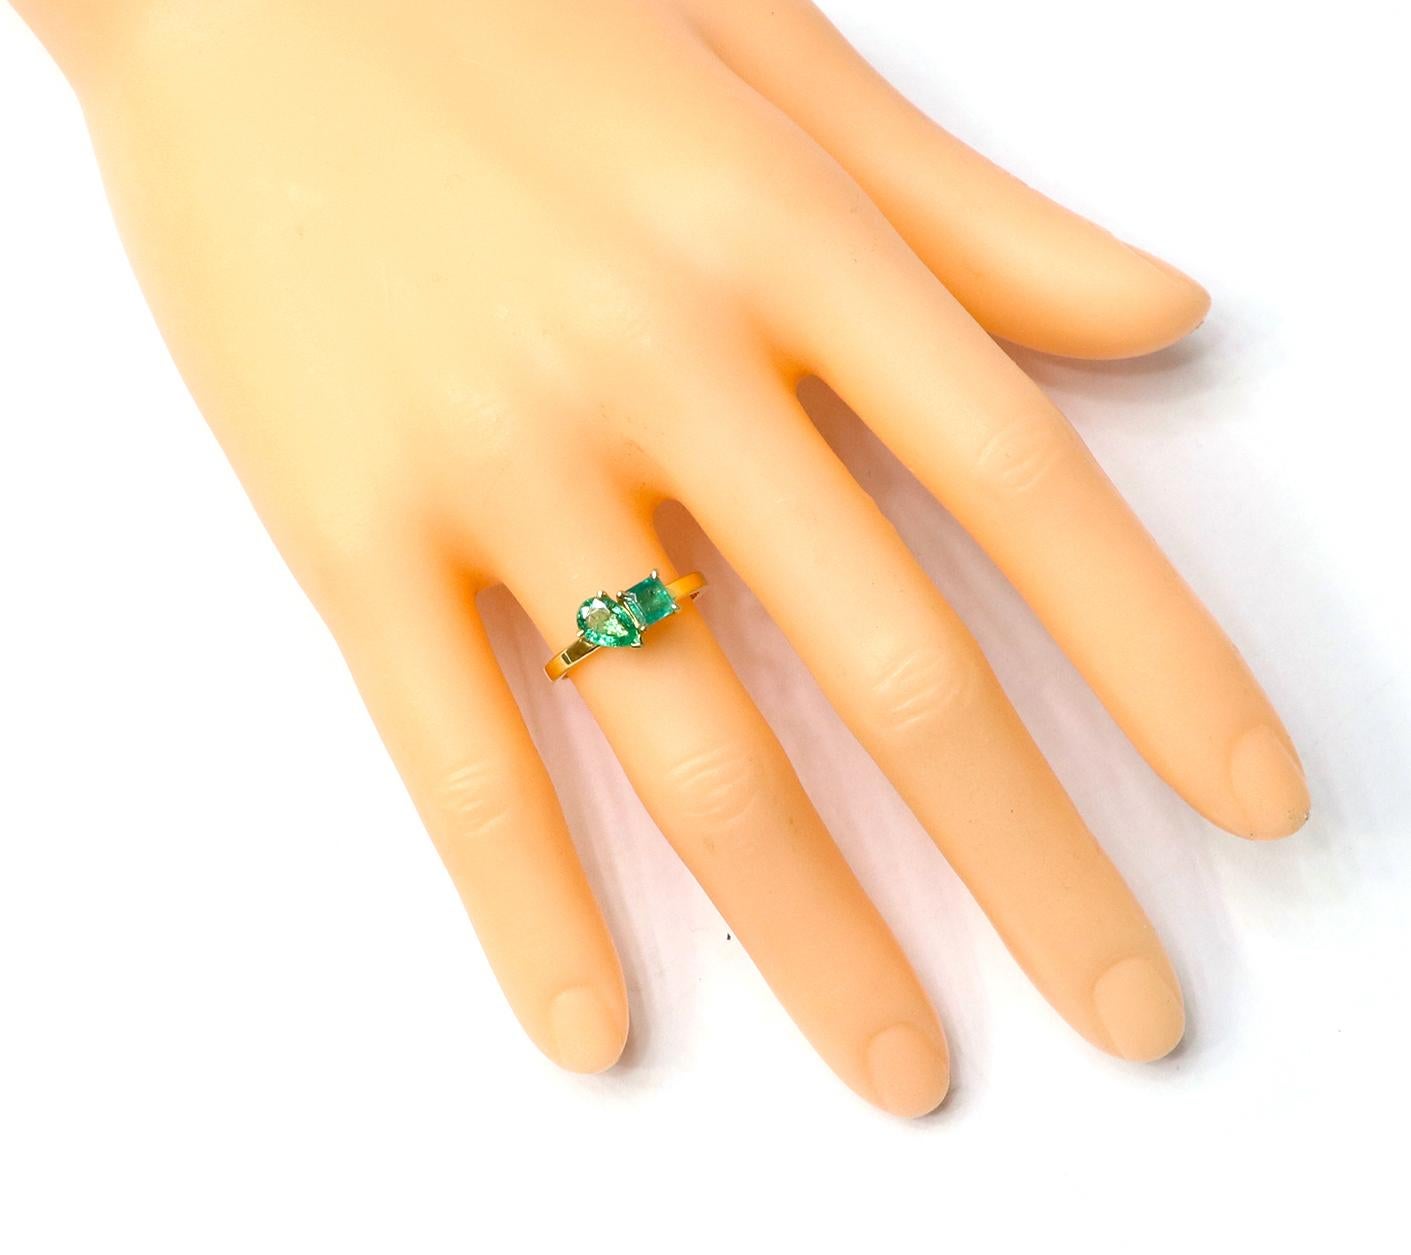 18 Karat Yellow Gold 0.98 Carats Natural Emerald Two-Stone Modern Fashion Ring

Meet your new everyday essential ring. Carefully Handcrafted, this contemporary design features a Pear Natural Emerald in a four-prong setting along with a Square-Cut